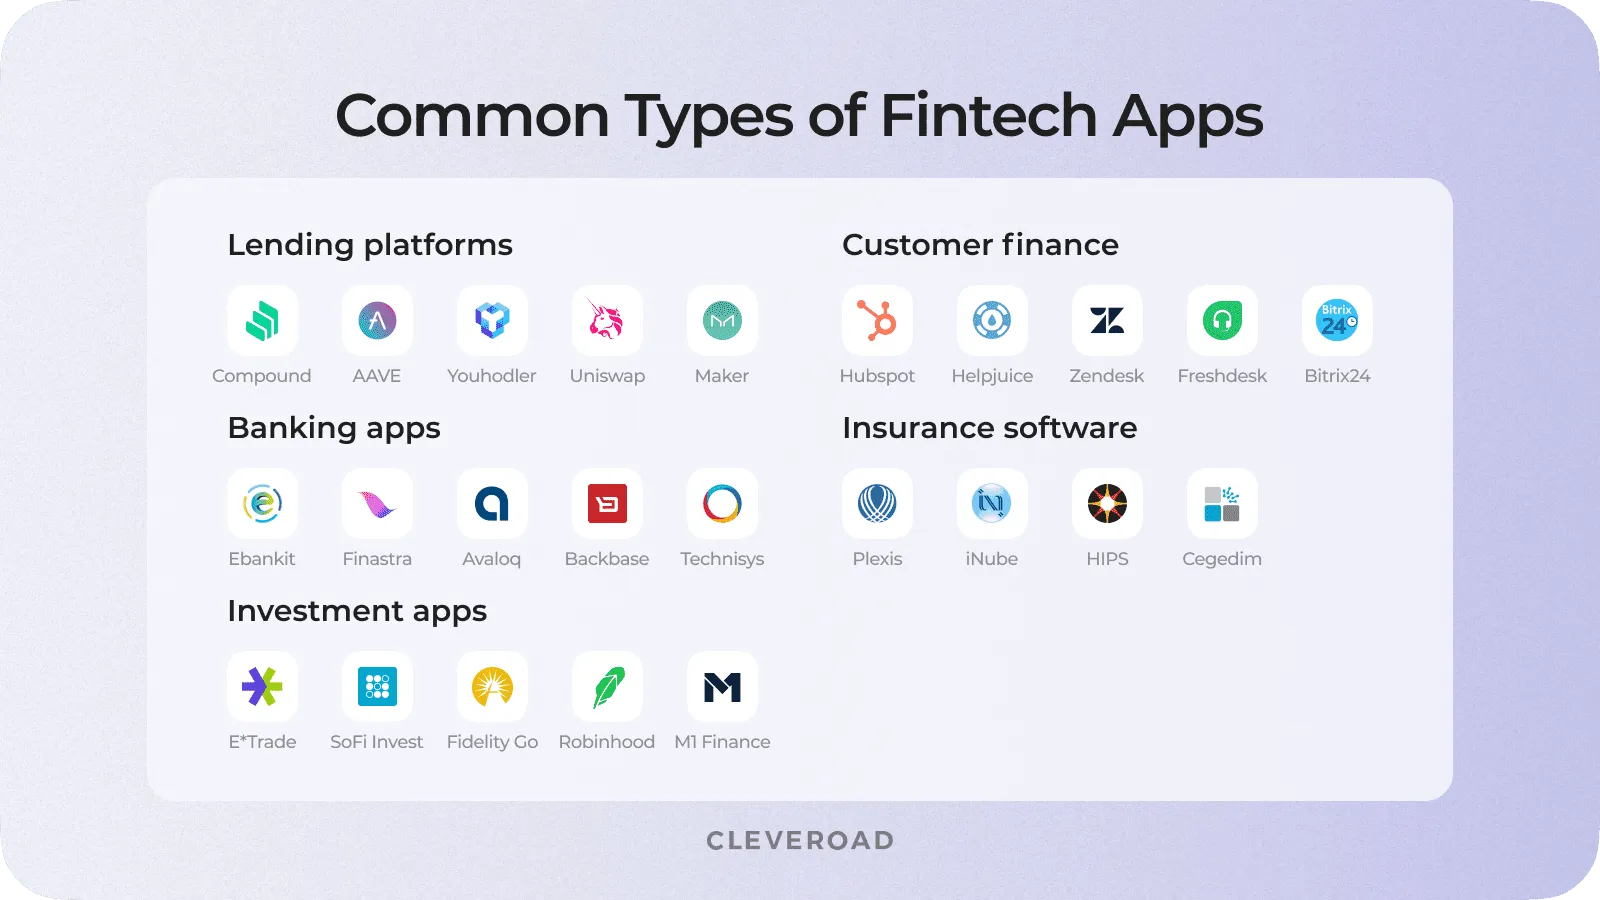 Finance app types, together with their well-known examples